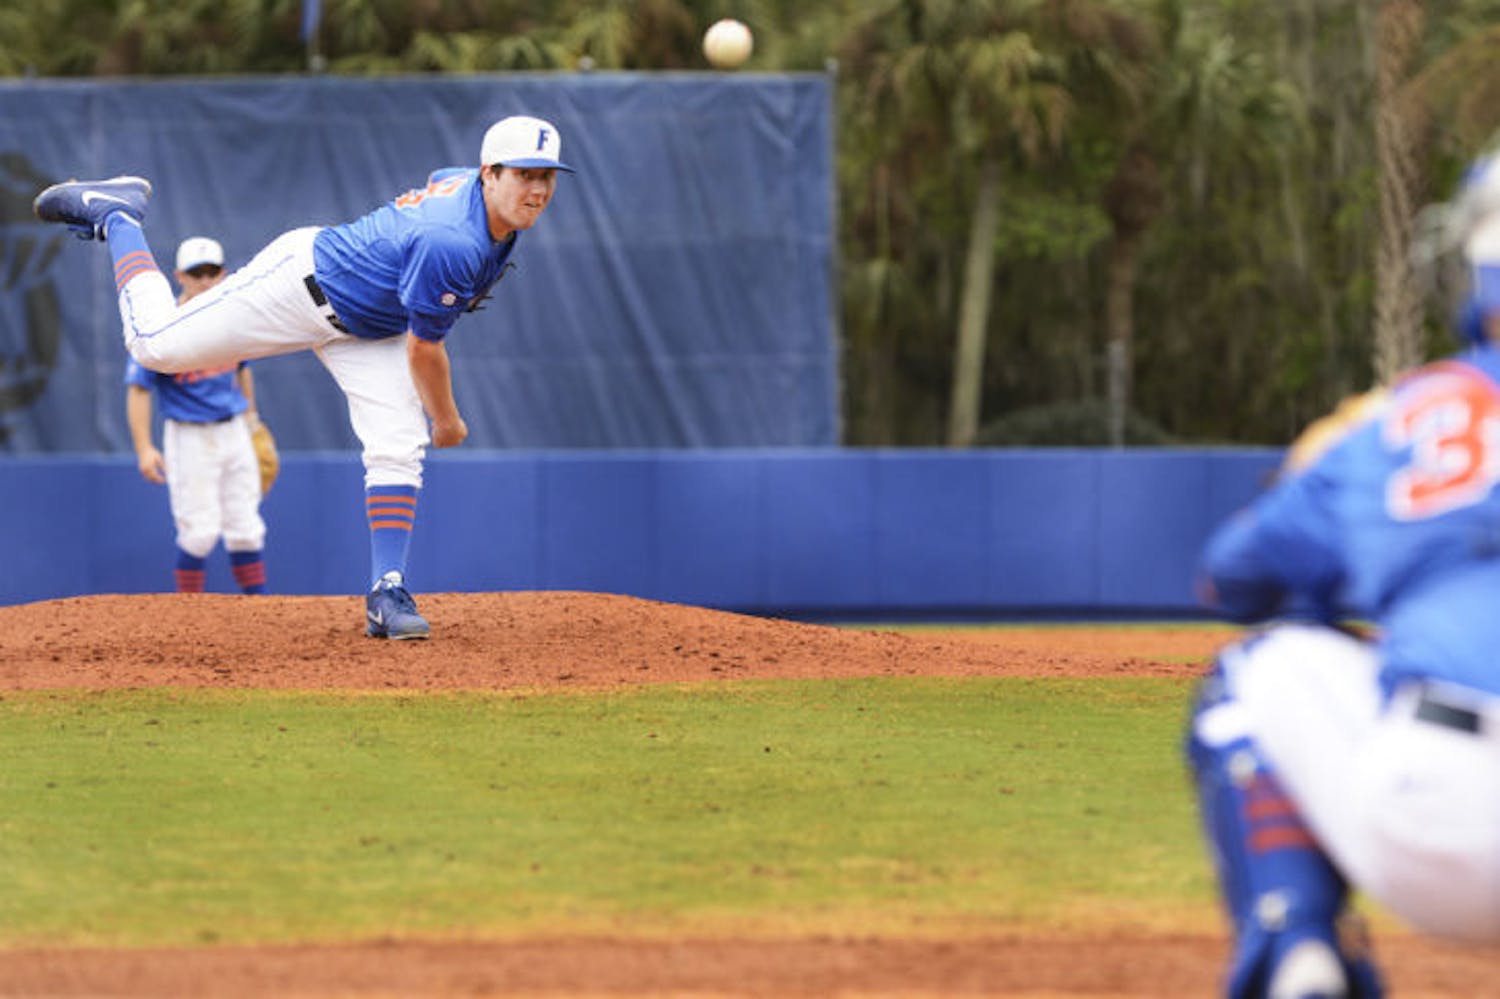 Sophomore Johnny Magliozzi warms up between innings during Florida’s 7-4 loss to Florida Gulf Coast on Feb. 24 at McKethan Stadium. Magliozzi and the Gators were eliminated from the NCAA Bloomington Regional on Saturday.&nbsp;